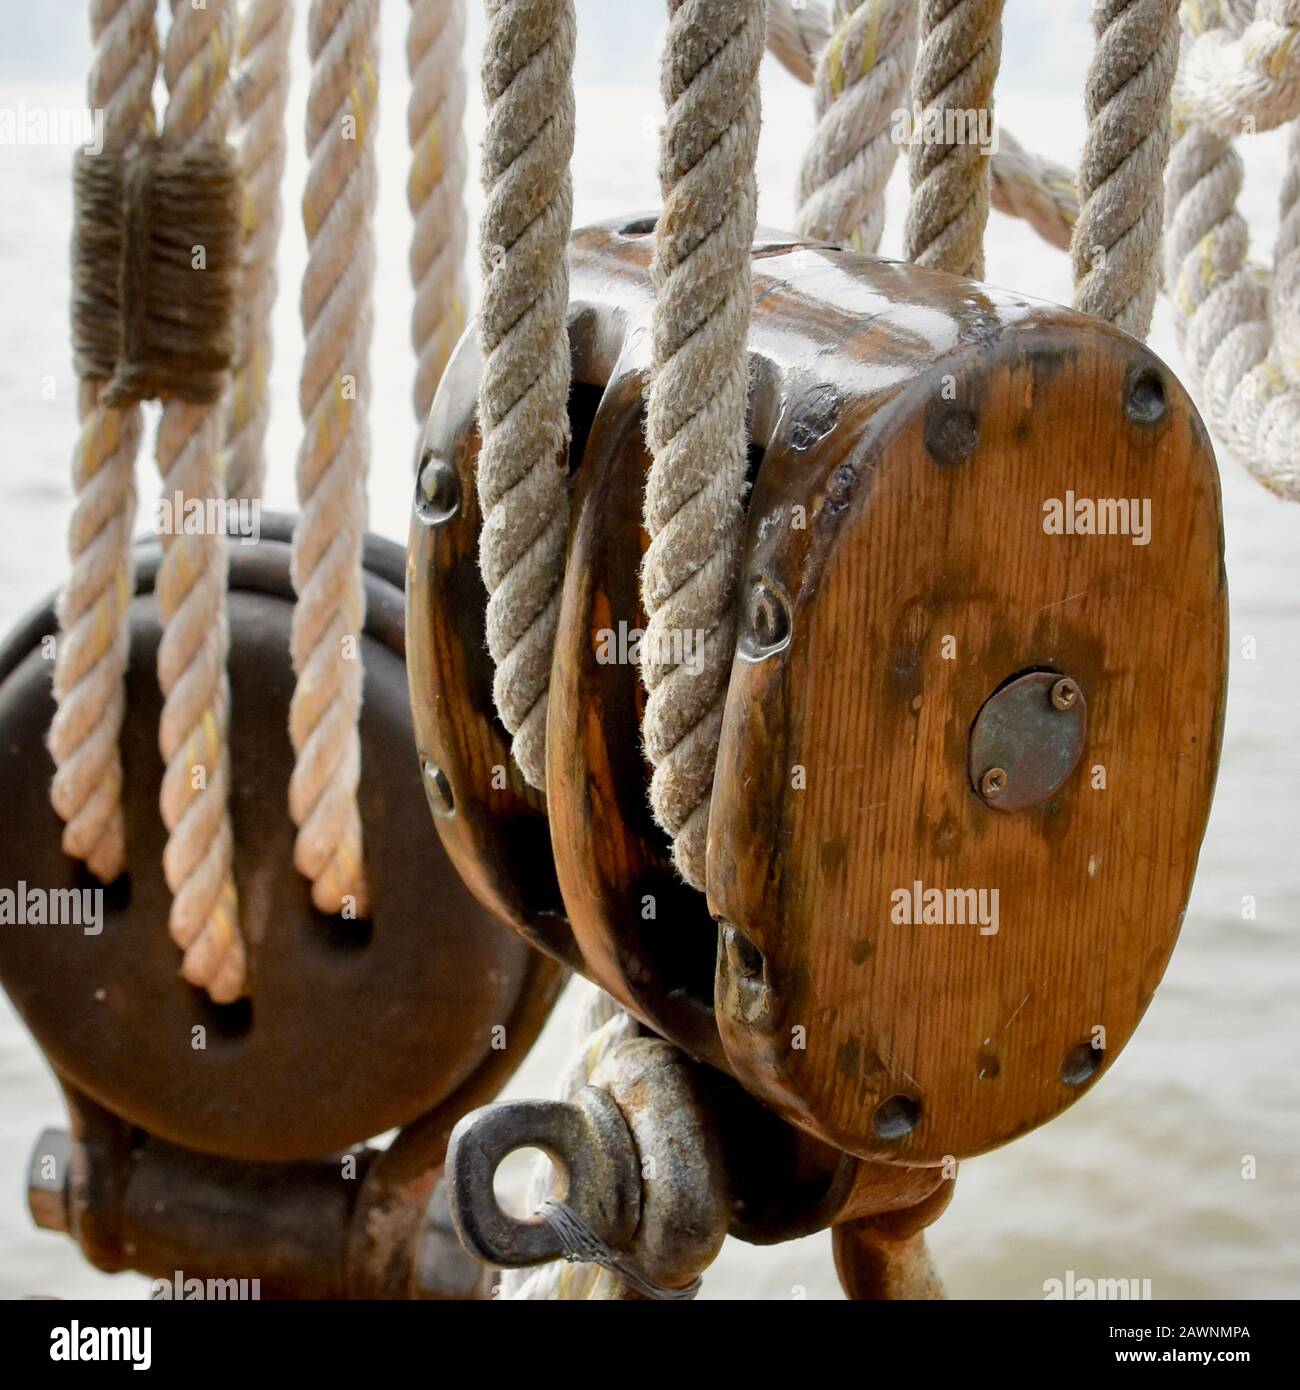 A wooden block and tackle on a historic sailing sloop. Stock Photo